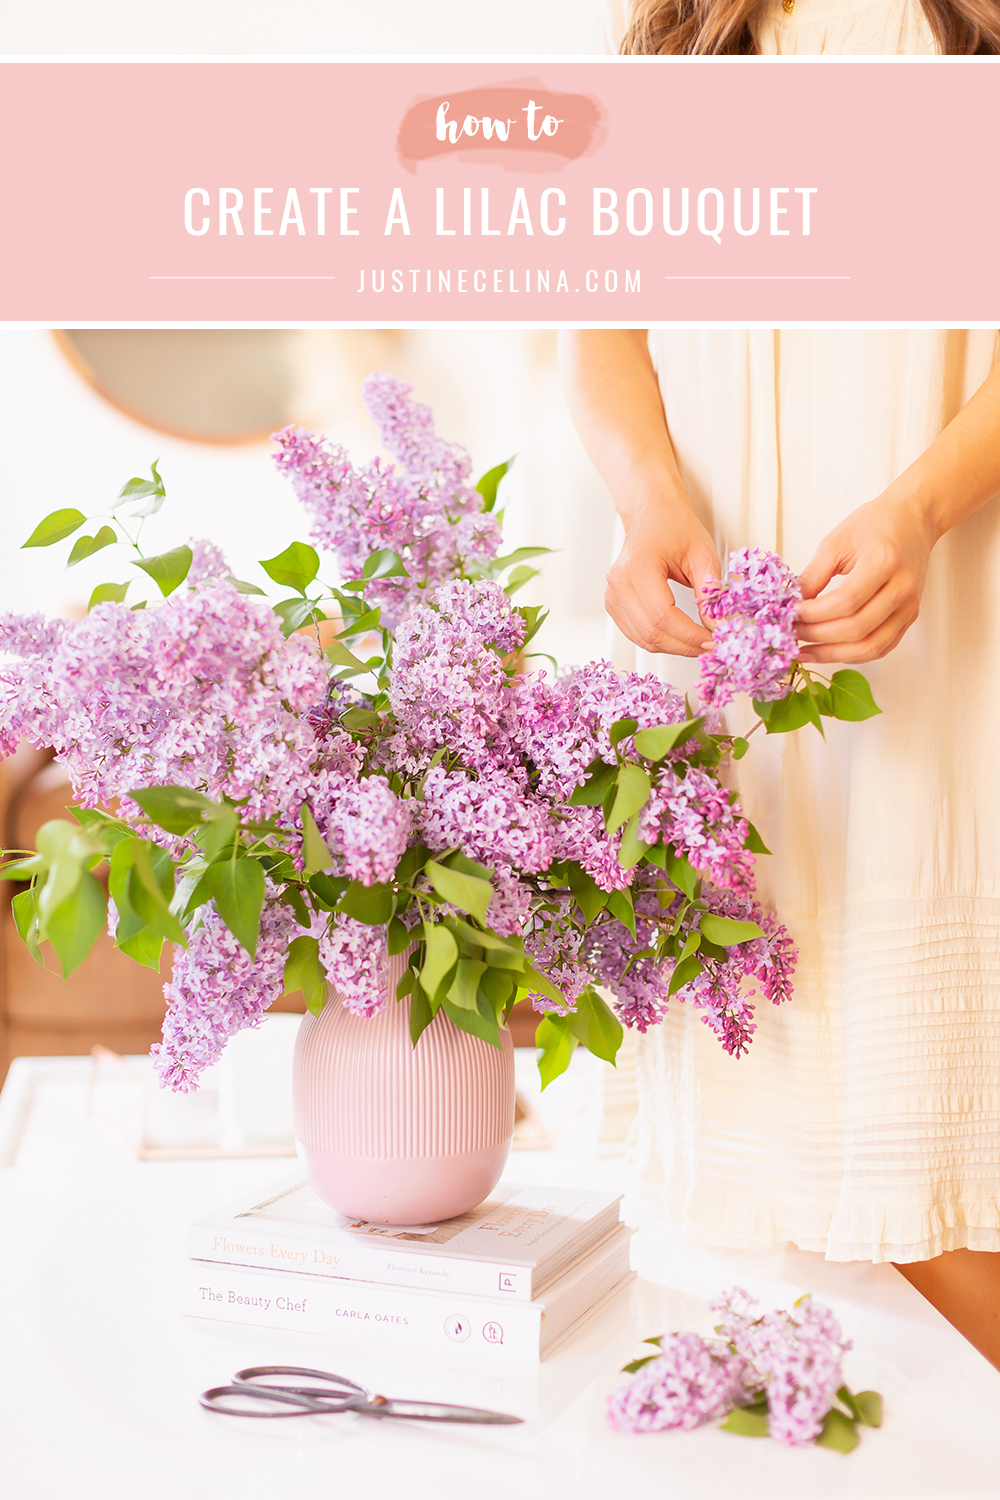 How to Create a Lilac Bouquet | Smiling brunette woman in a flowy linen dress creating an oversized lilac arrangement in her neutral mid century meets boho modern living room | DIY Lilac Flower Arrangement | How to Forage Lilacs | How to Prolong Lilac Vase Life | How to Arrange Lilacs | Fresh Lilac Flower Bouquet | Extremely Pretty Lilac Arrangement | Purple Lilac Arrangement | How to Cut Lilacs from a tree or bush | Calgary Creative Lifestyle Blogger // JustineCelina.com